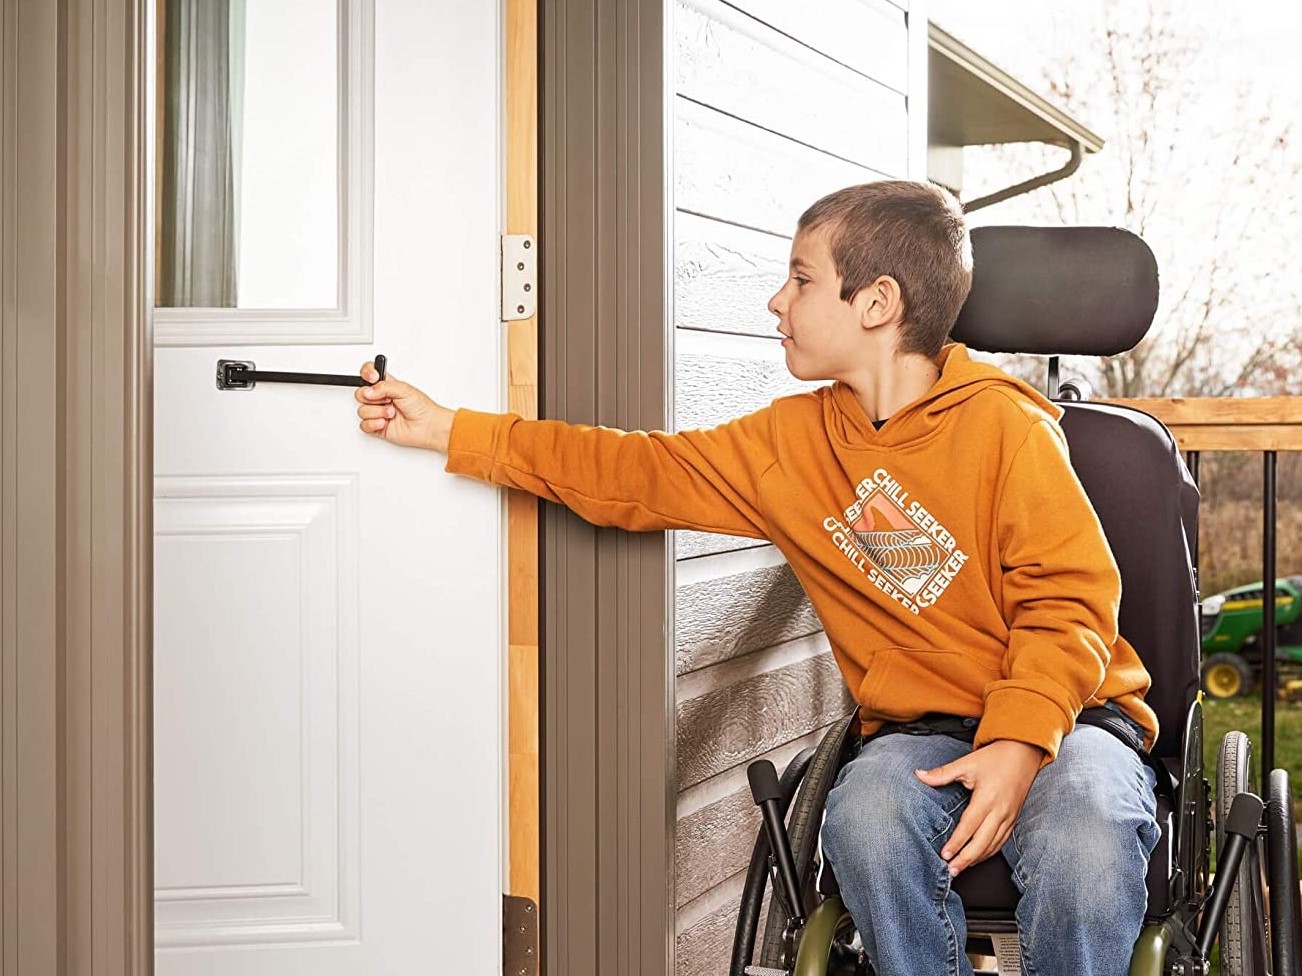 Shows a boy on wheelchair pulling the handle of the T-Pull Door Closer device which is fixed on a door at a level which enables him to close the door easily after he goes through it with his wheelchair.